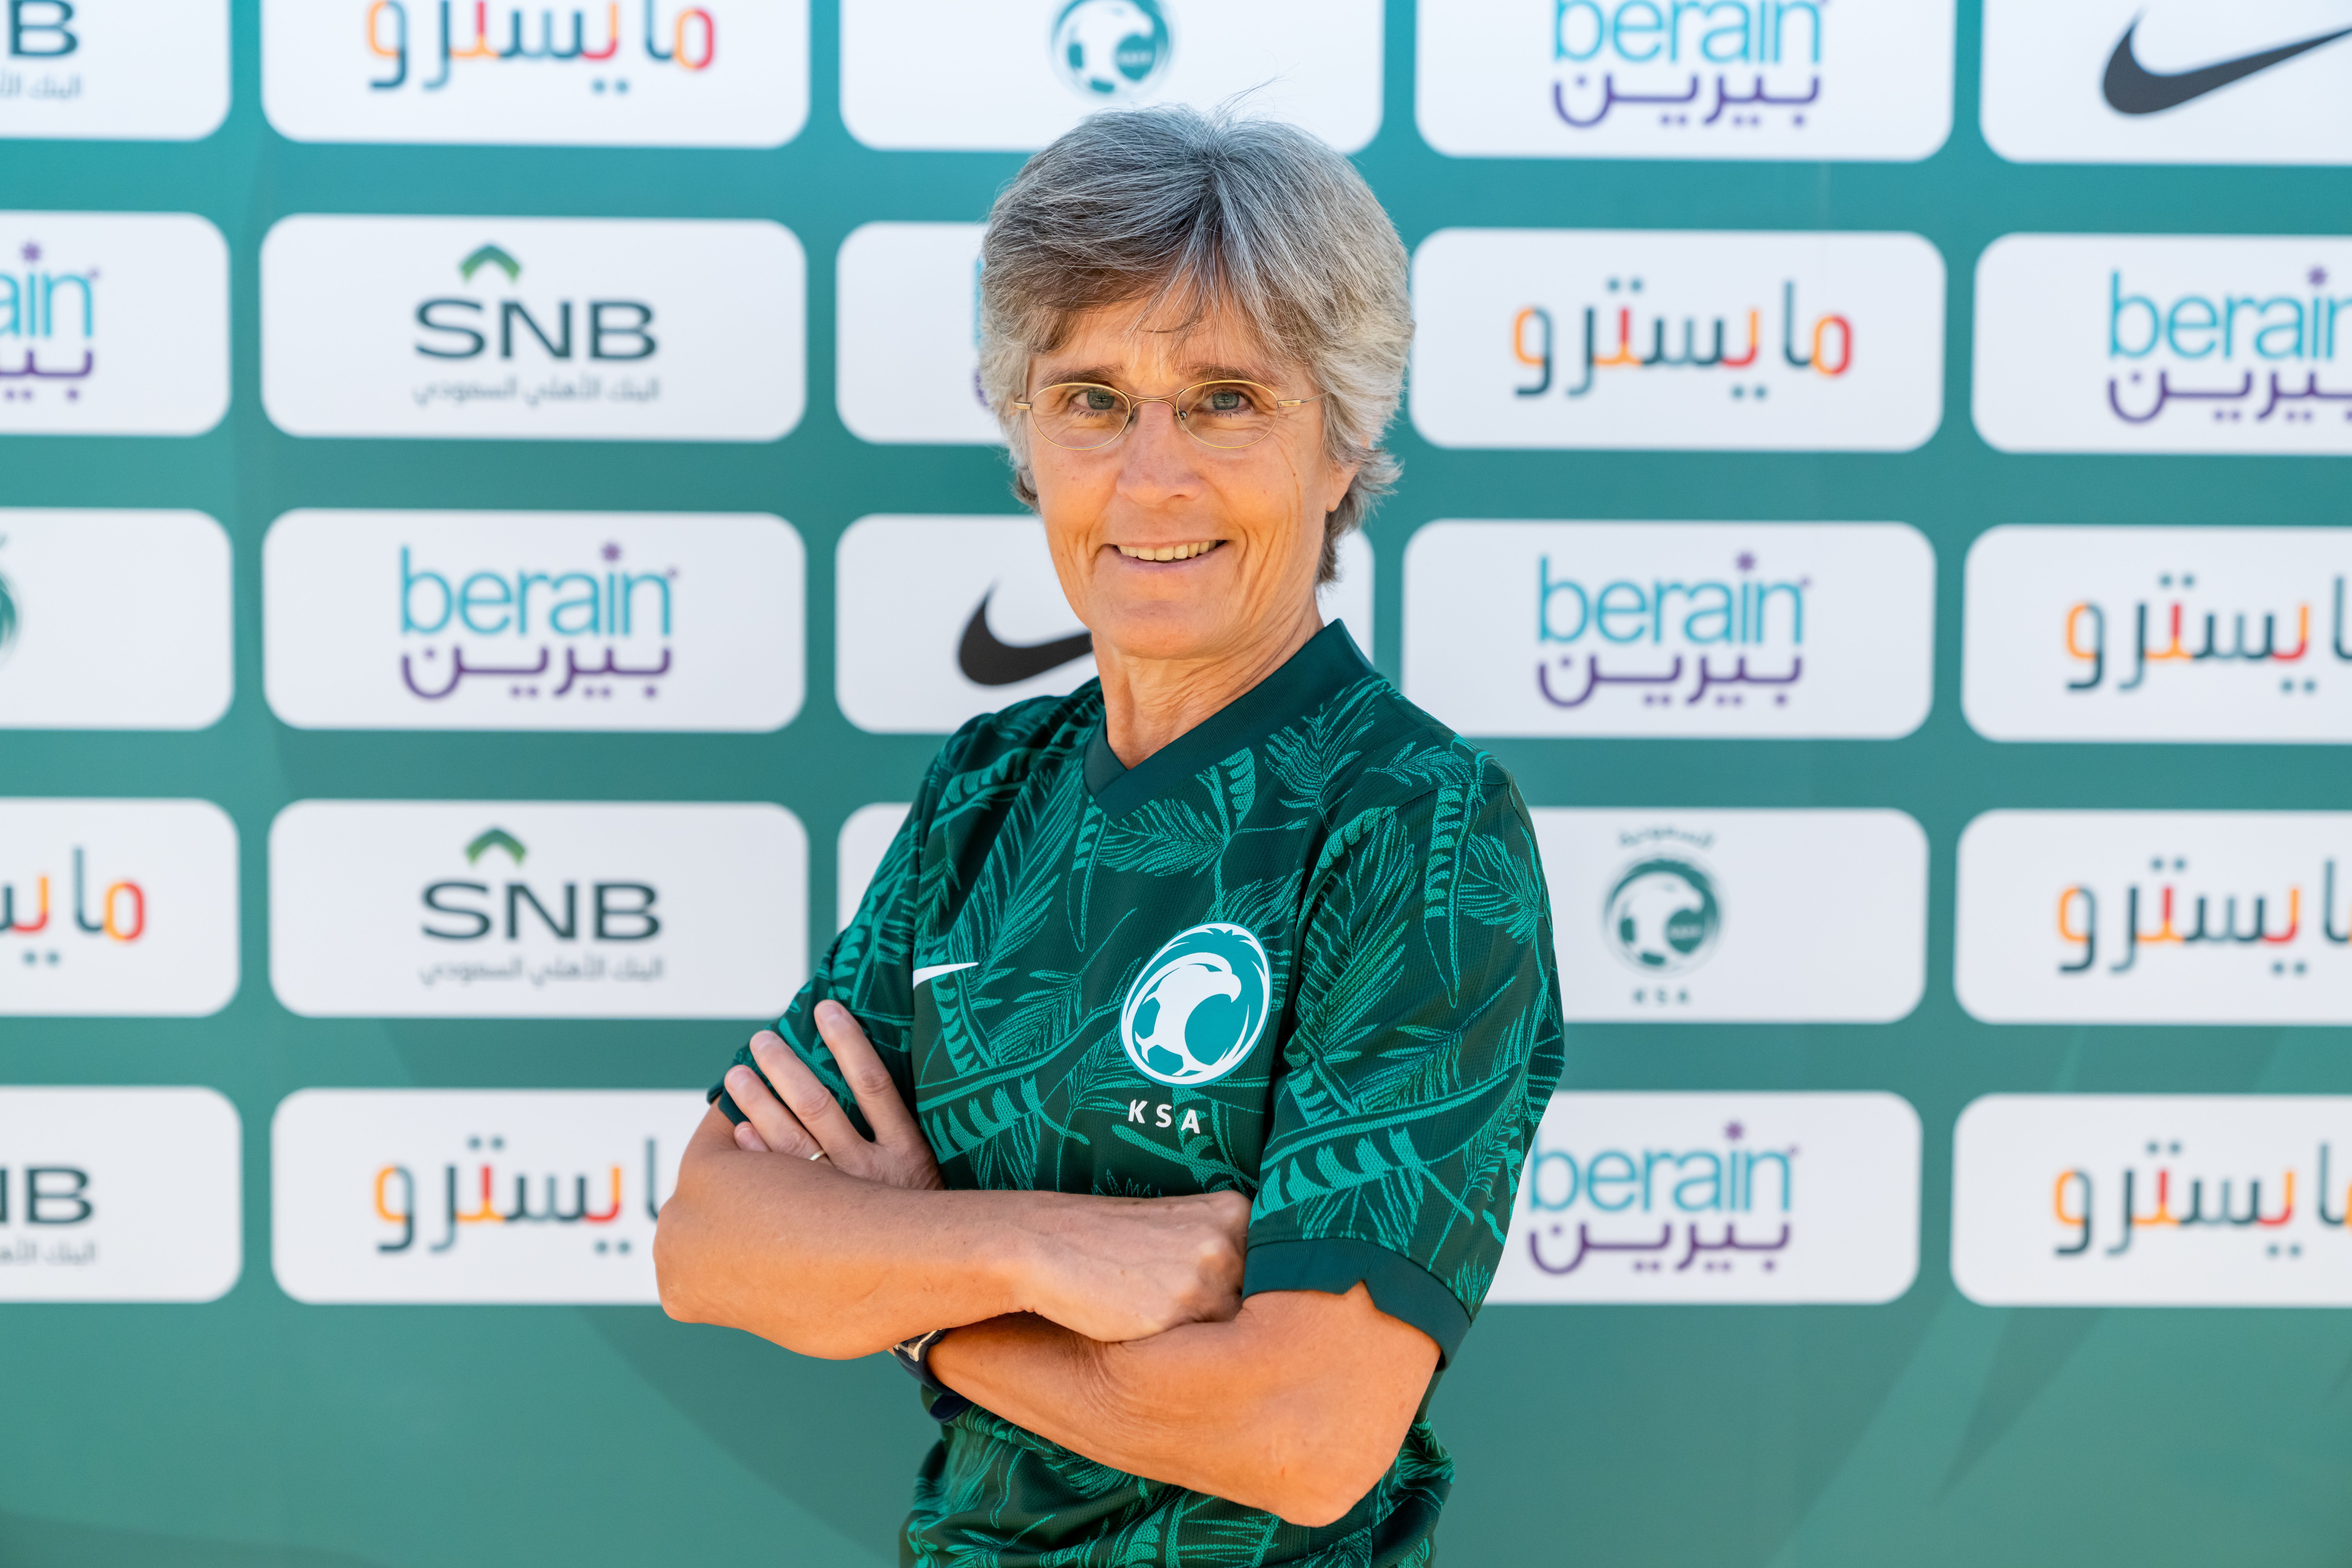 A smiling woman with short grey hair wearing glasses and a green football jersey stands with arms crossed against a backdrop.